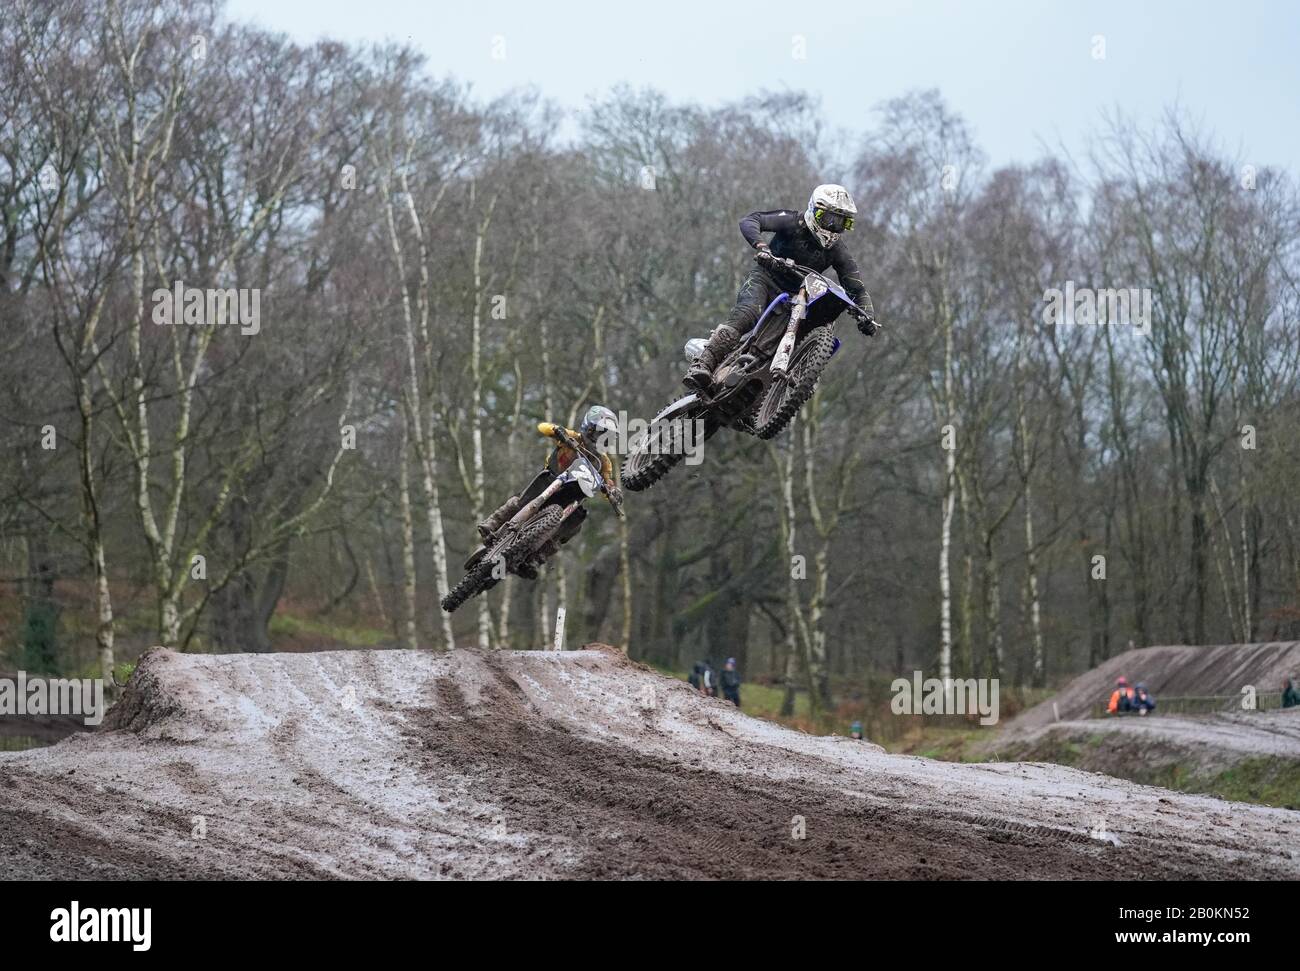 Jack Bintcliffe (52) leads Gianluca Facchetti (22) over a jump during practice at the Hawkstone International Motocross race, in Hawkstone Park, Shrewsbury, United Kingdom. February 9 2020. (Photo by IOS/ESPA-Images) Stock Photo